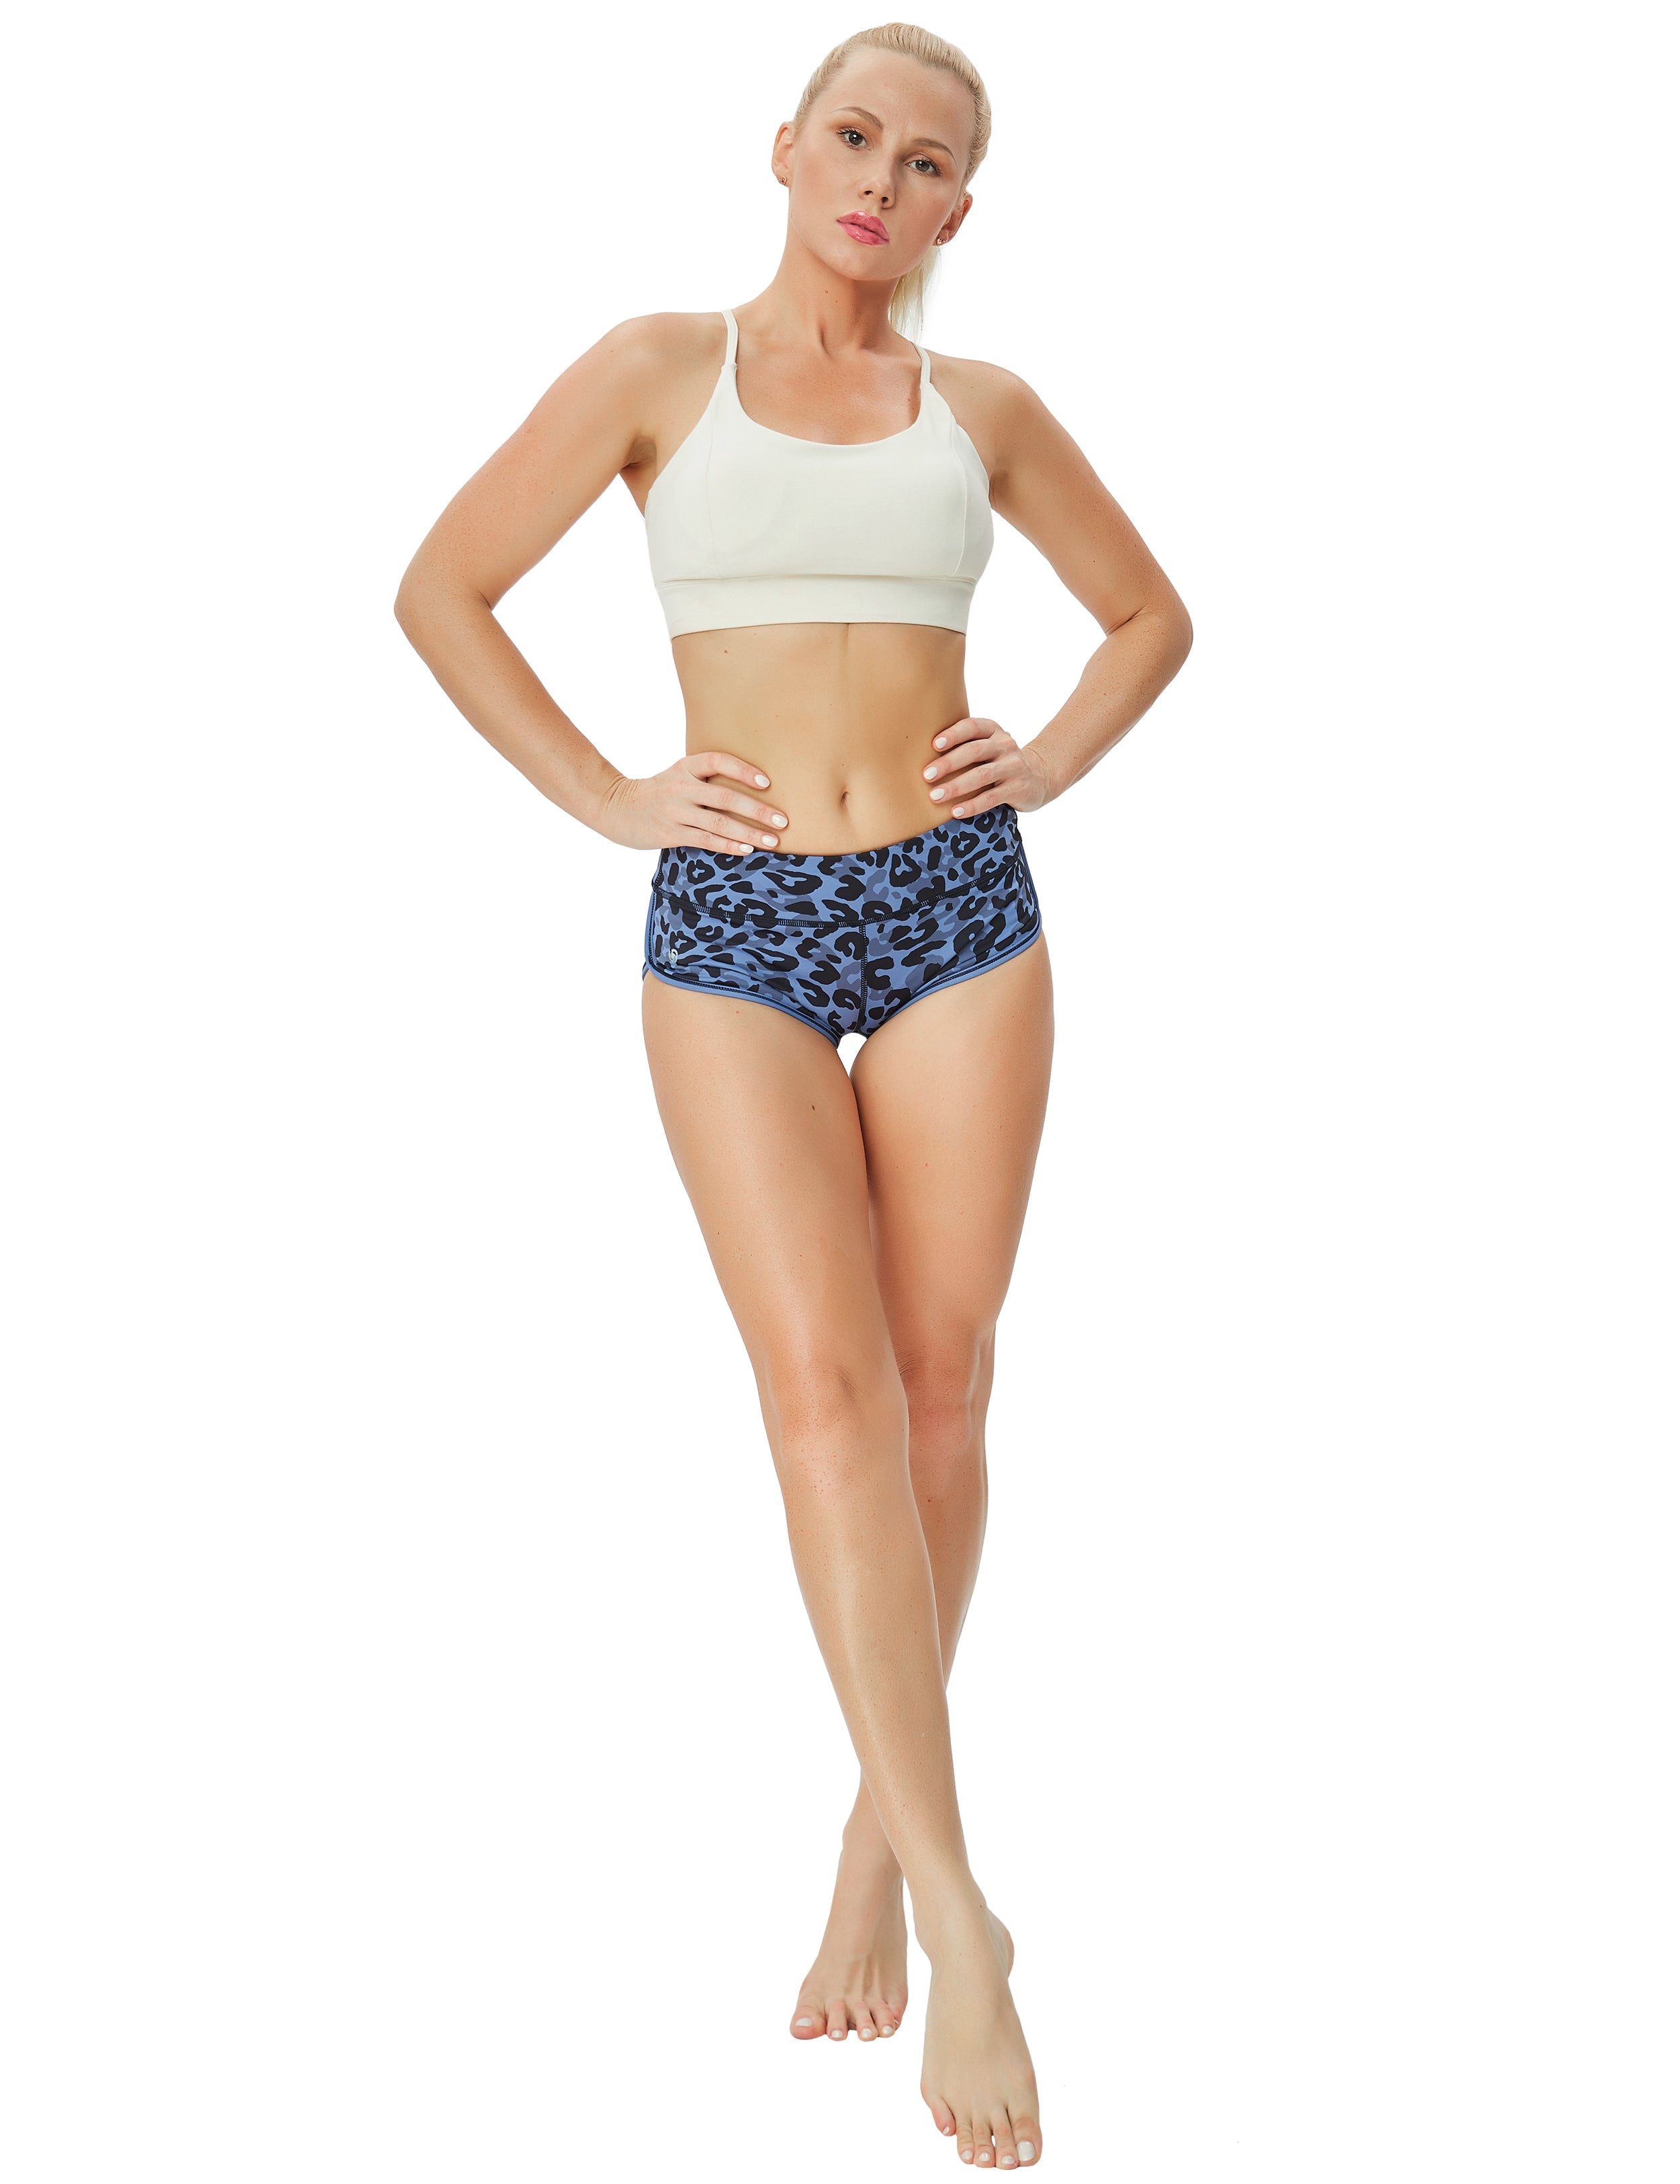 Printed Booty Running Shorts navy_leopard Sleek, soft, smooth and totally comfortable: our newest sexy style is here. Softest-ever fabric High elasticity High density 4-way stretch Fabric doesn't attract lint easily No see-through Moisture-wicking Machine wash 78% Polyester, 22% Spandex